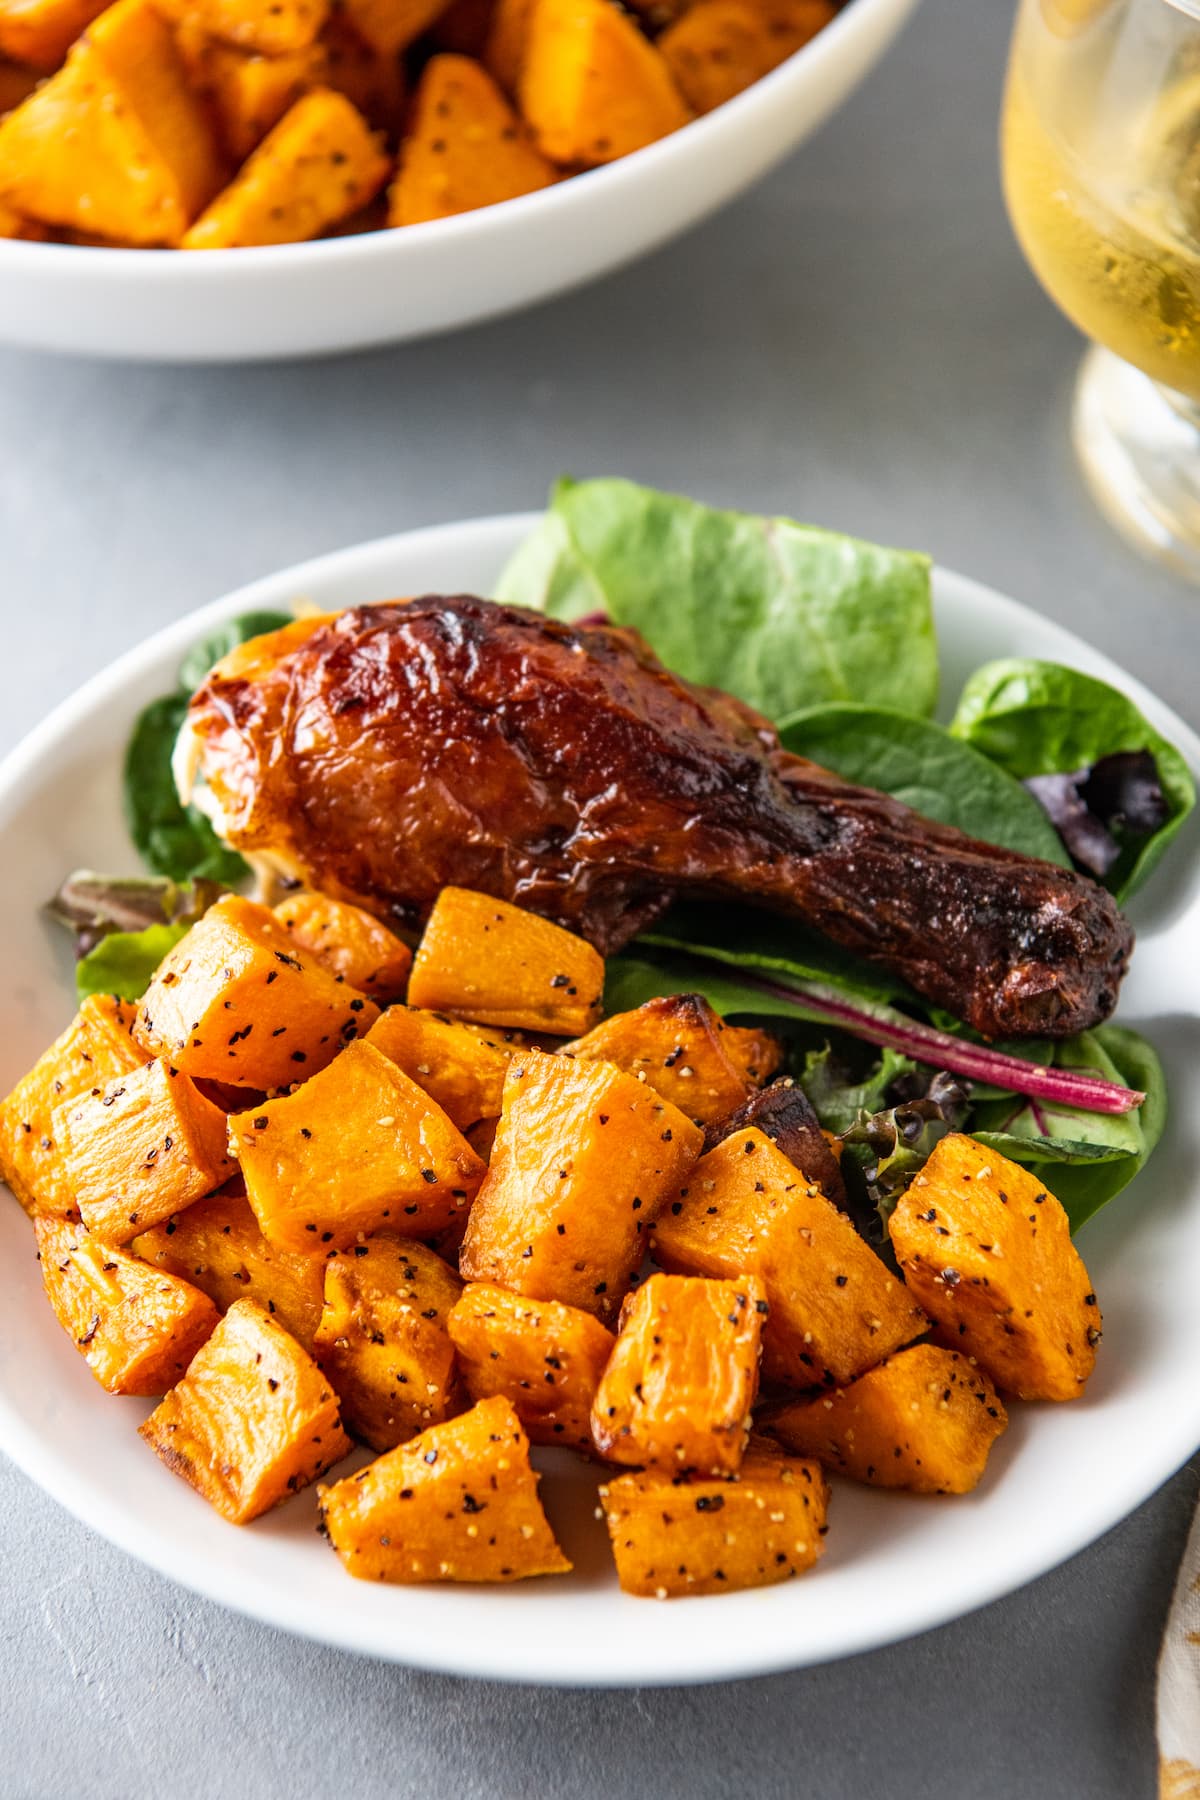 a sweet potato side dish next to a chicken leg and salad on a plate